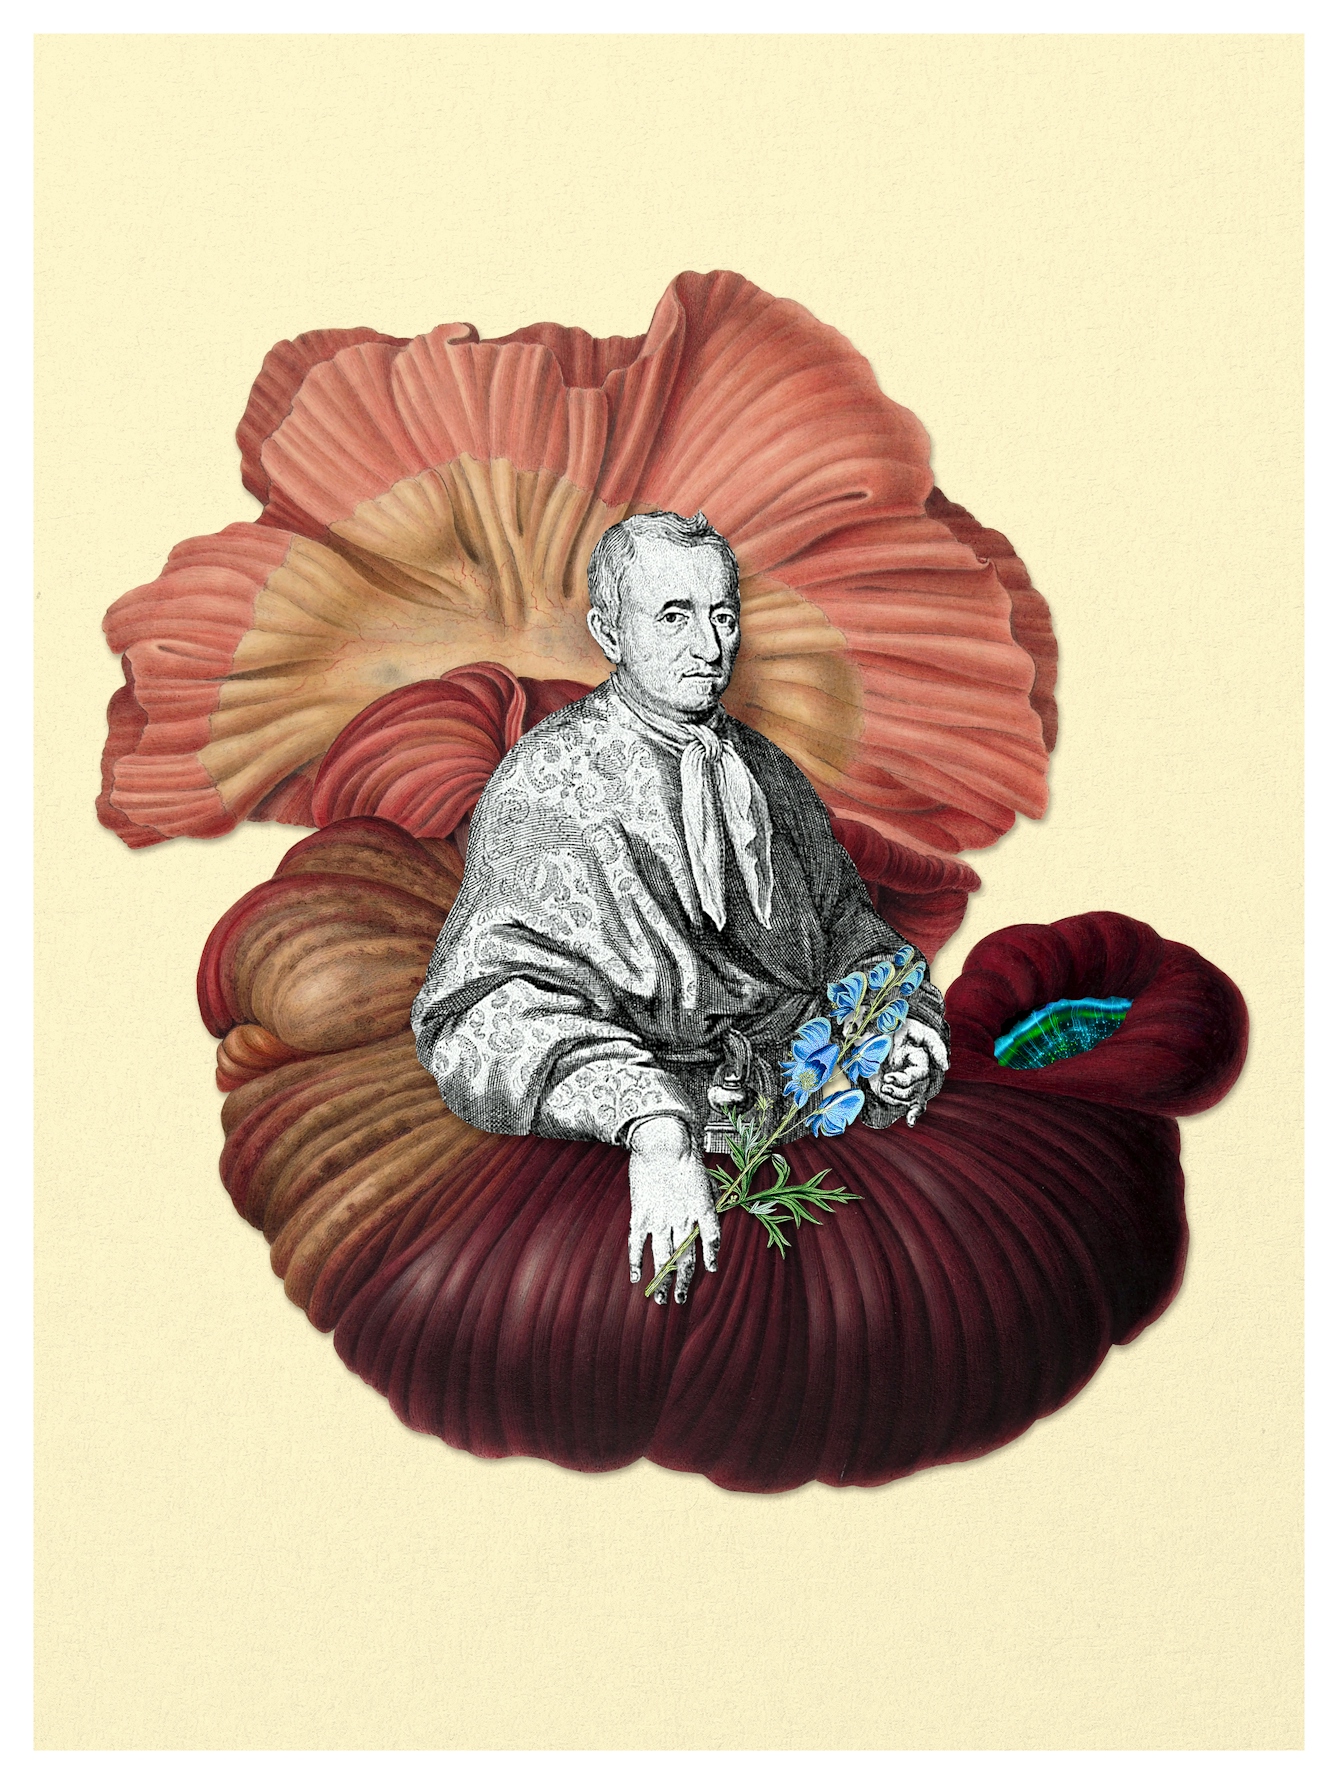 Digital collage of archival material.  A man is nested within an illustration of the gut, holding a wolfsbane plant and looking at the viewer.  In the cavity of the gut there is a small, universe like hole.